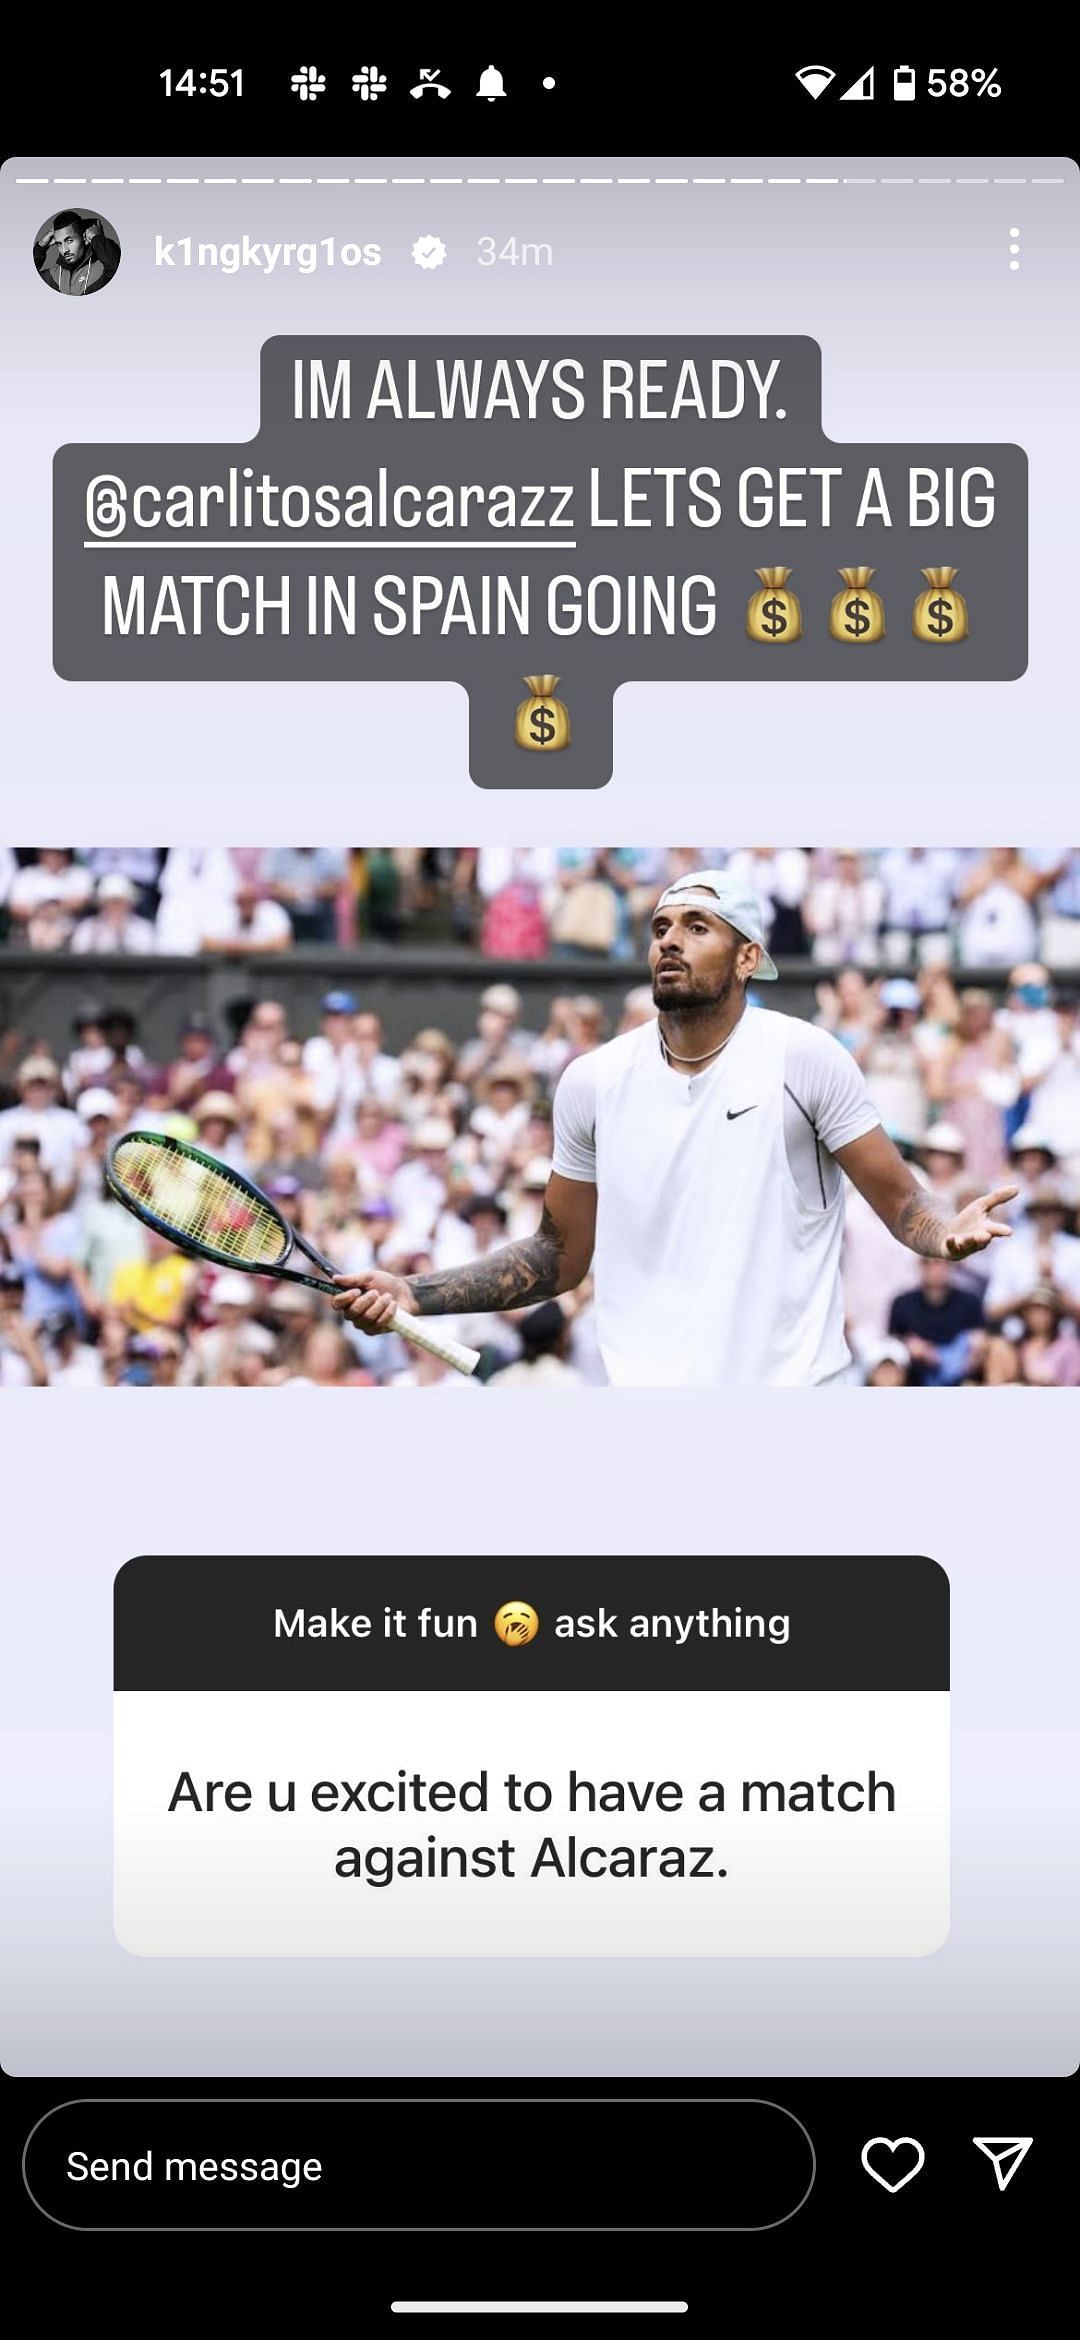 Nick Kyrgios challenges Carlos Alcaraz for a match in Spain